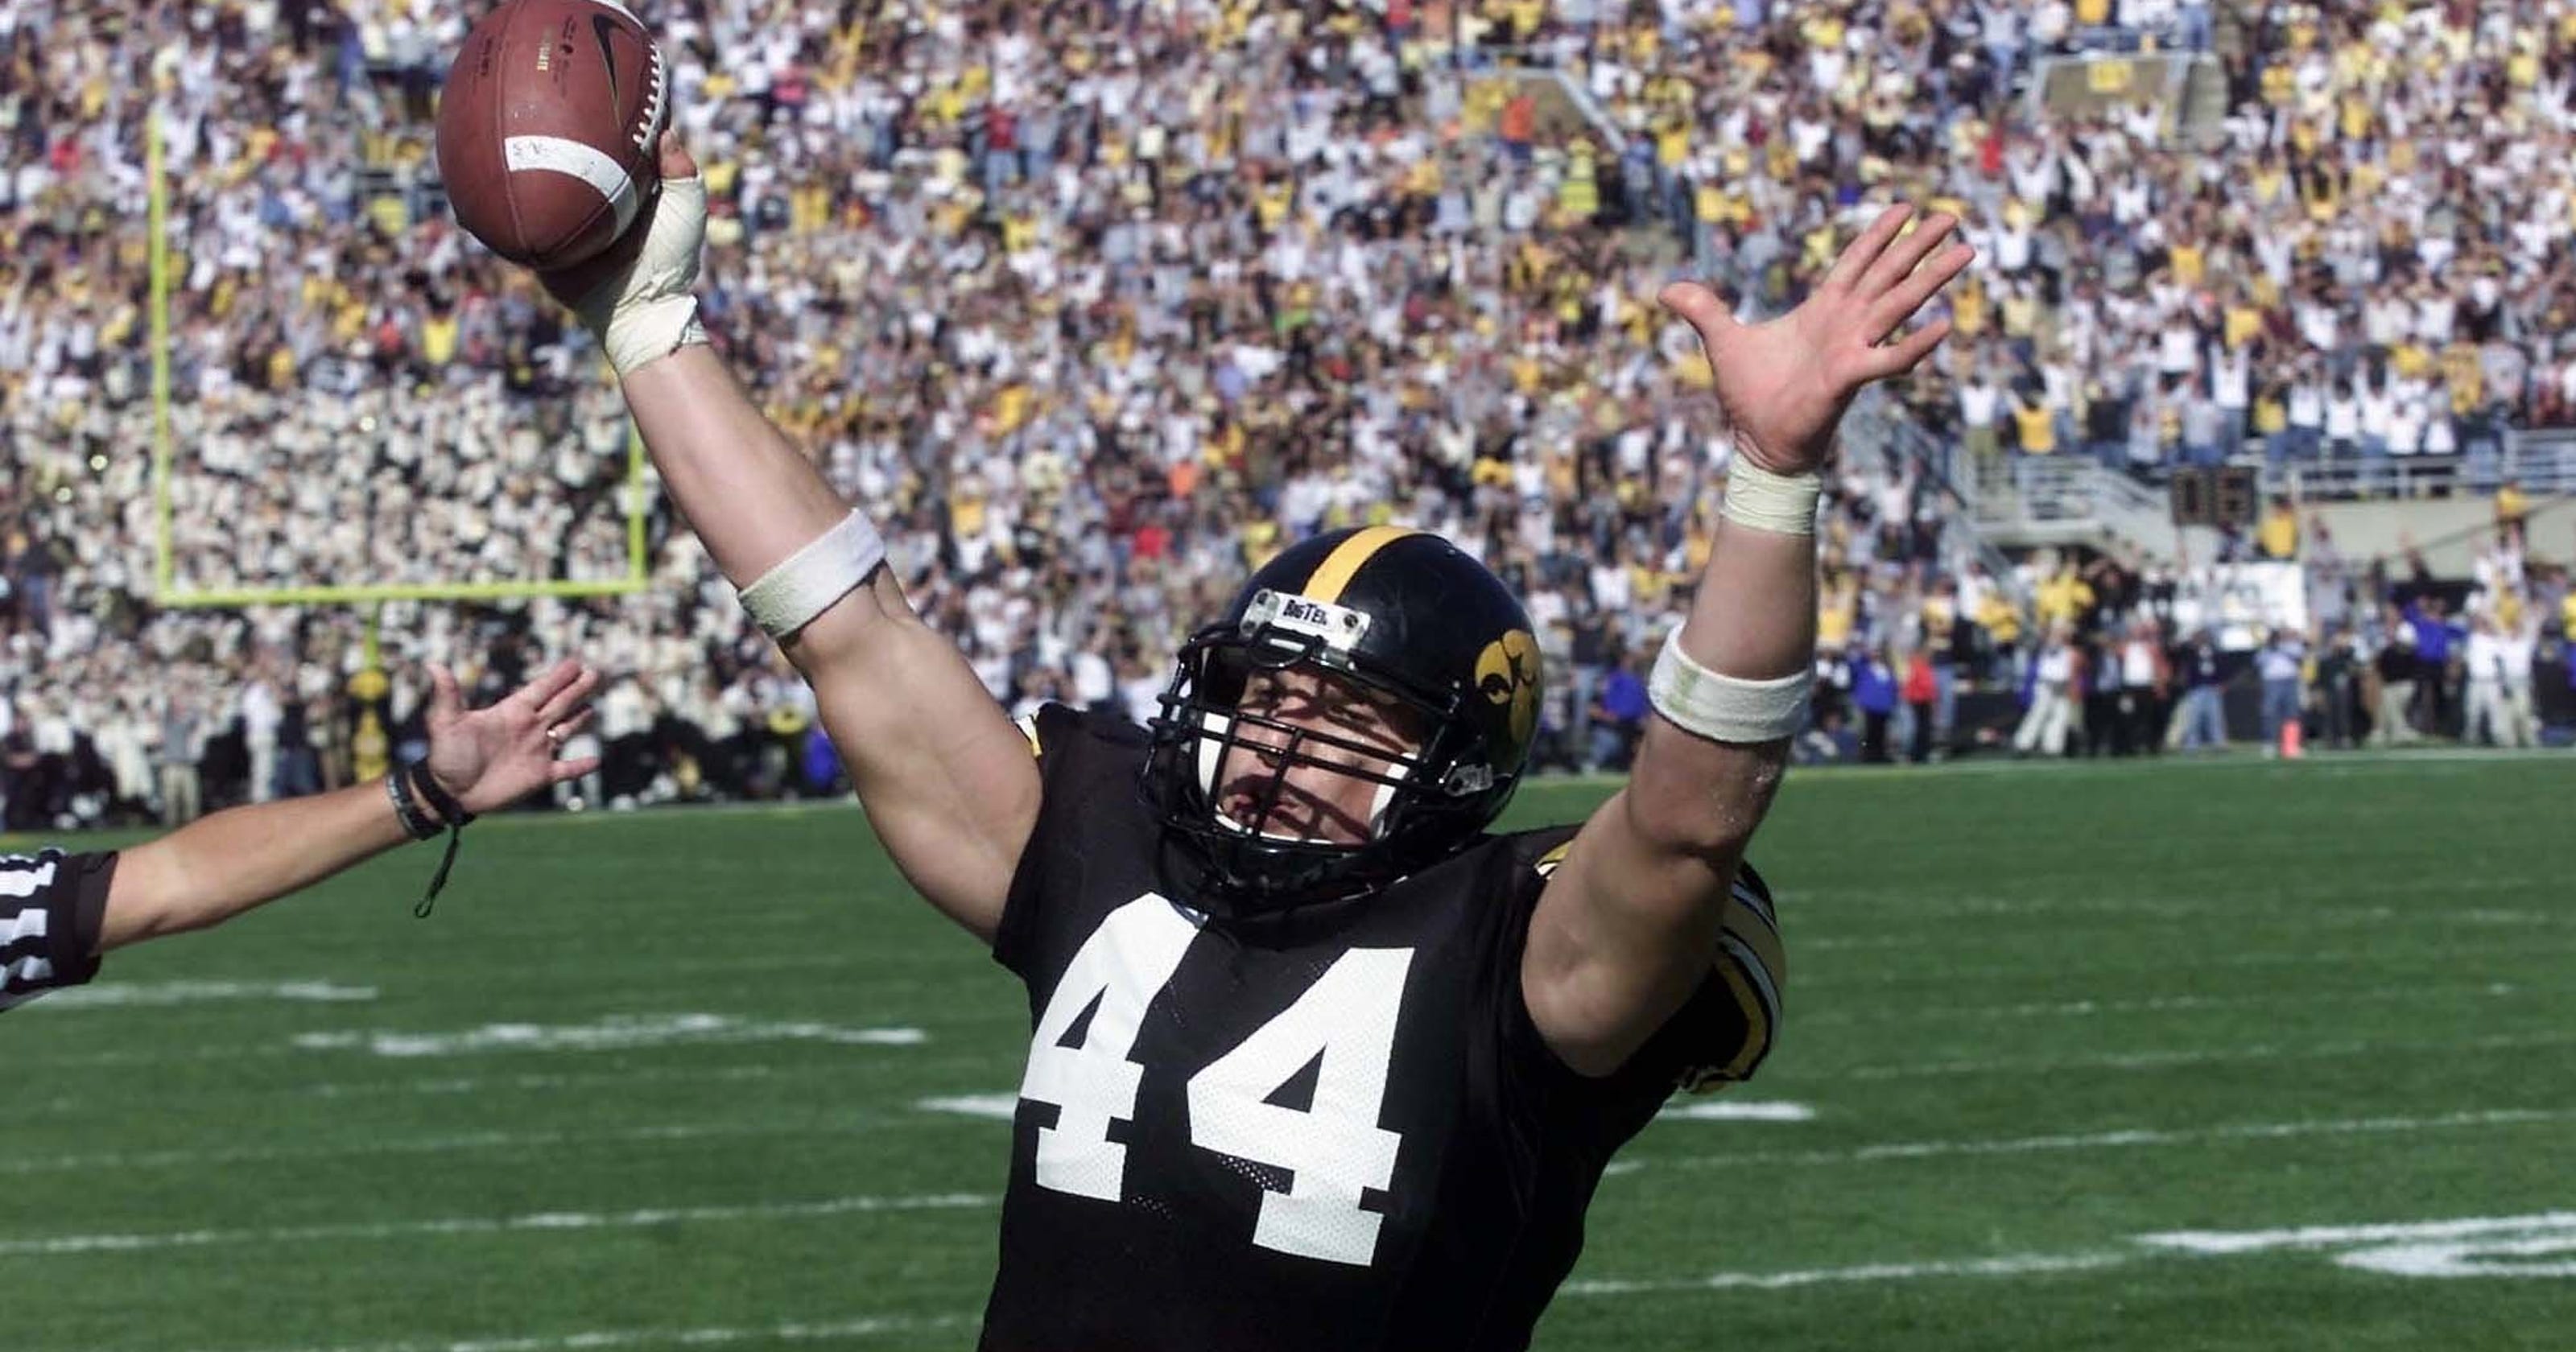 Iowa Hawkeyes football Photos of the greatest tight ends from "Tight